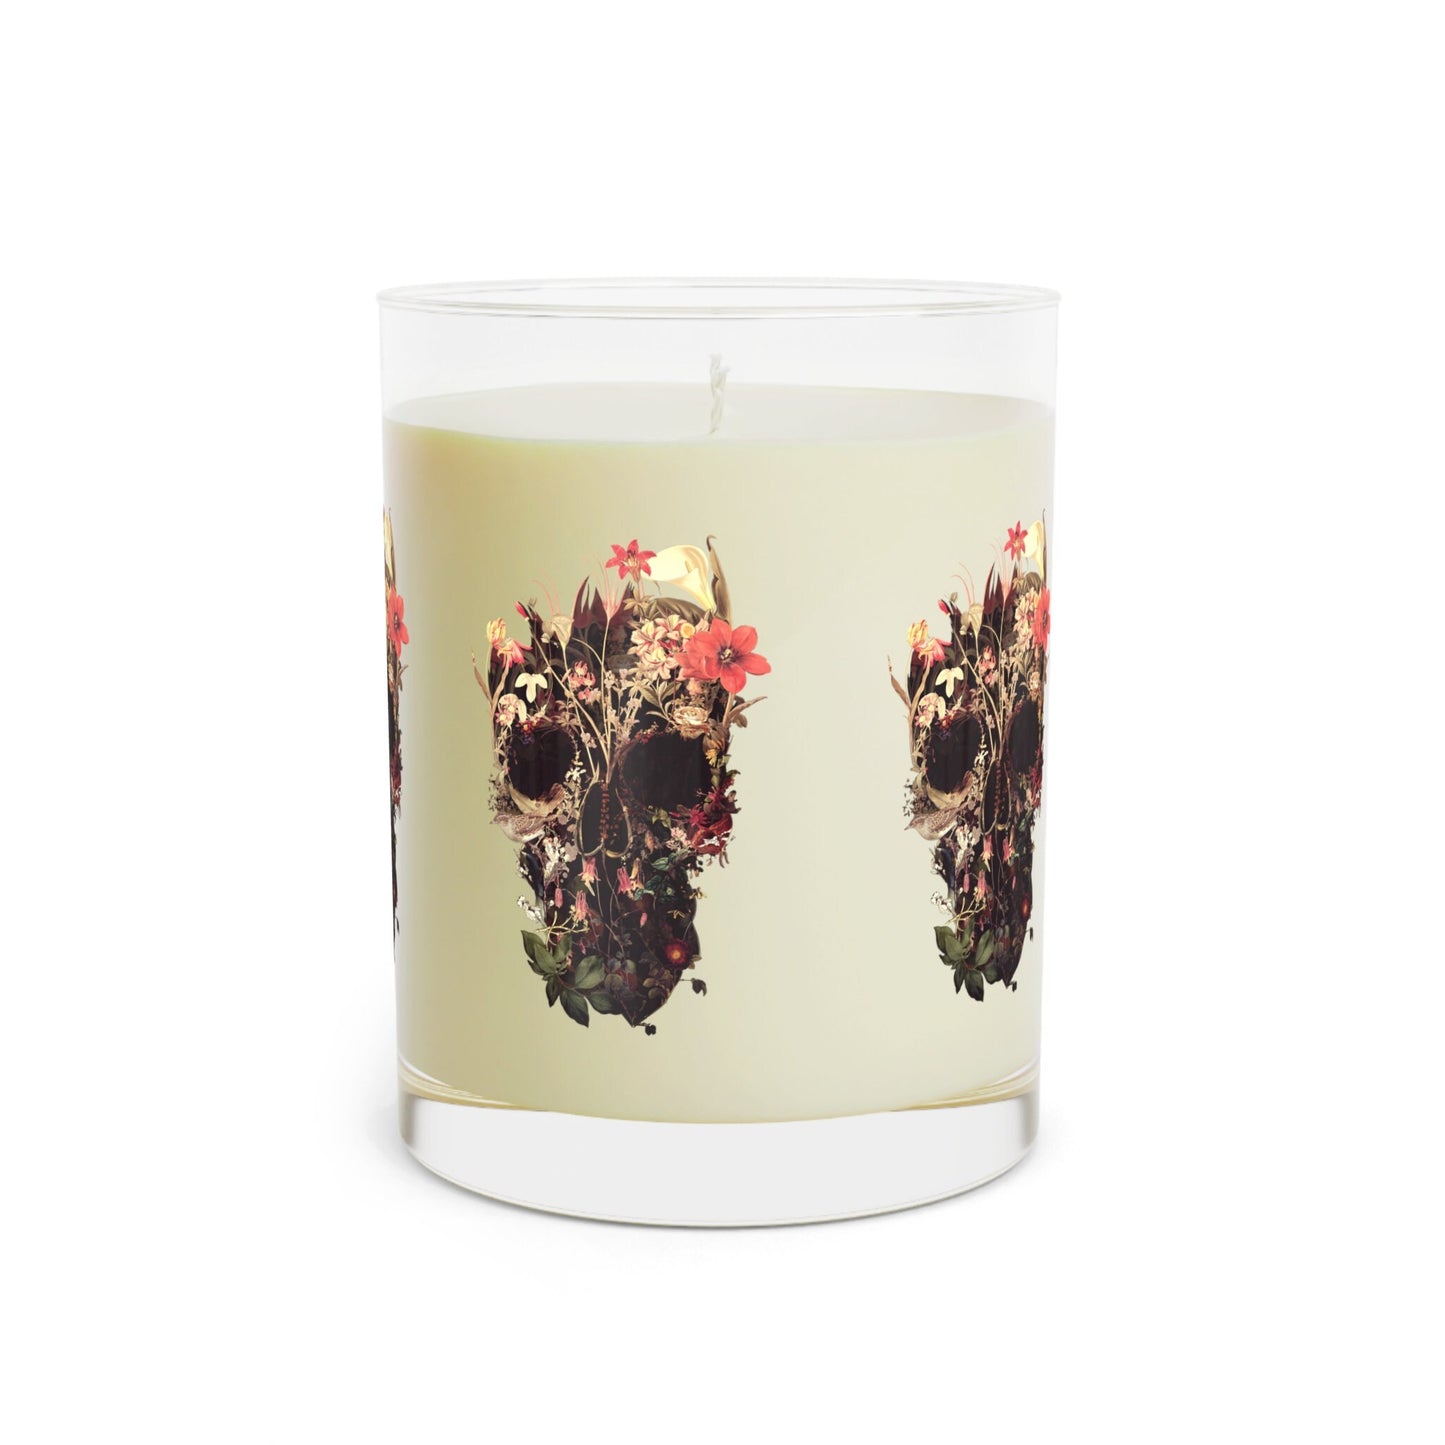 Bloom Skull Scented Candle - Full Glass, 11oz